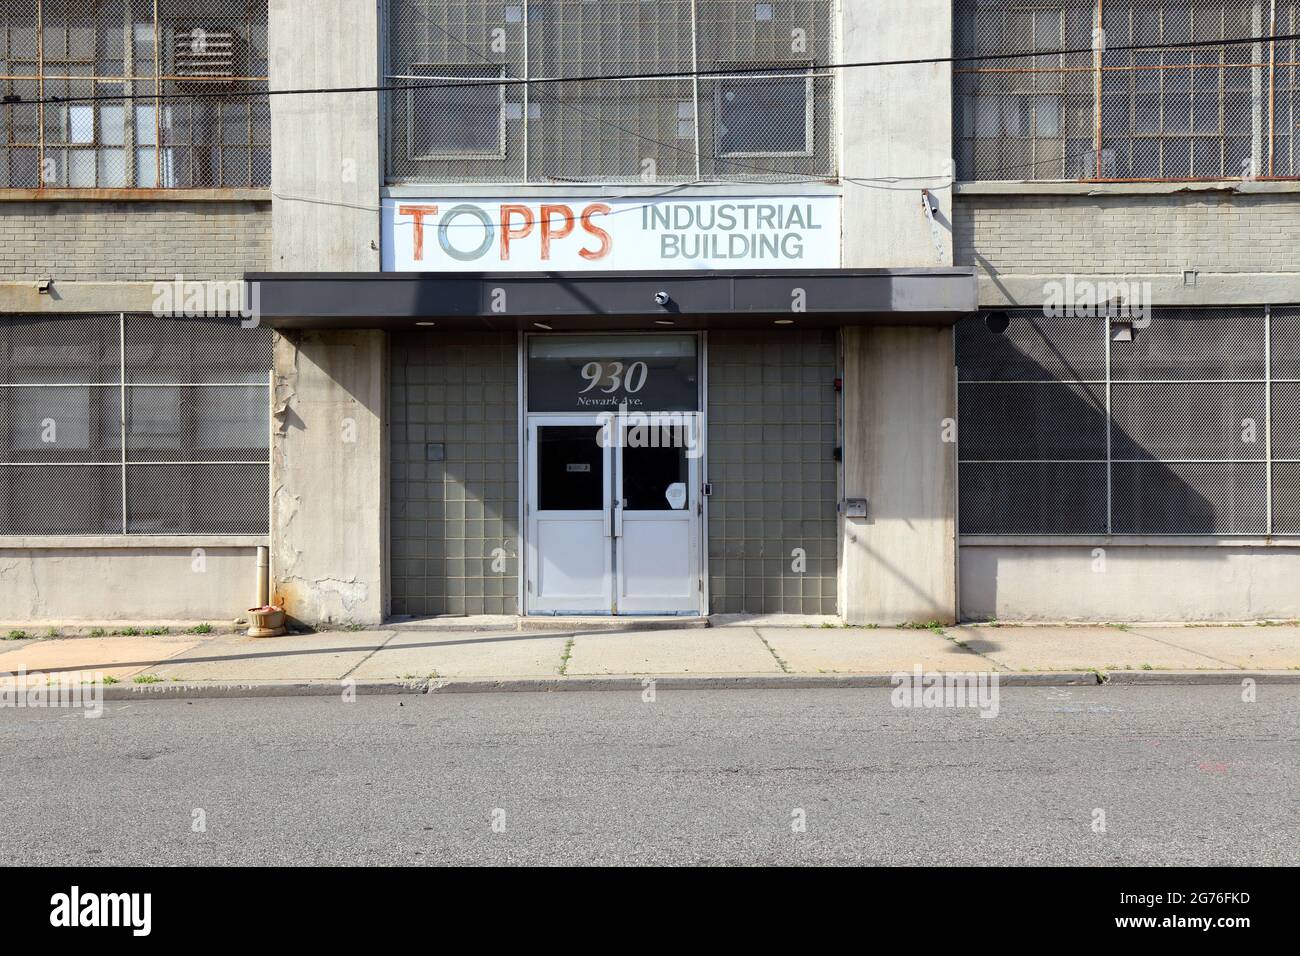 Topps Industrial Building, 930 Newark Ave, Jersey City, NJ. exterior storefront of a mixed-use industrial and commercial building including a gallery Stock Photo